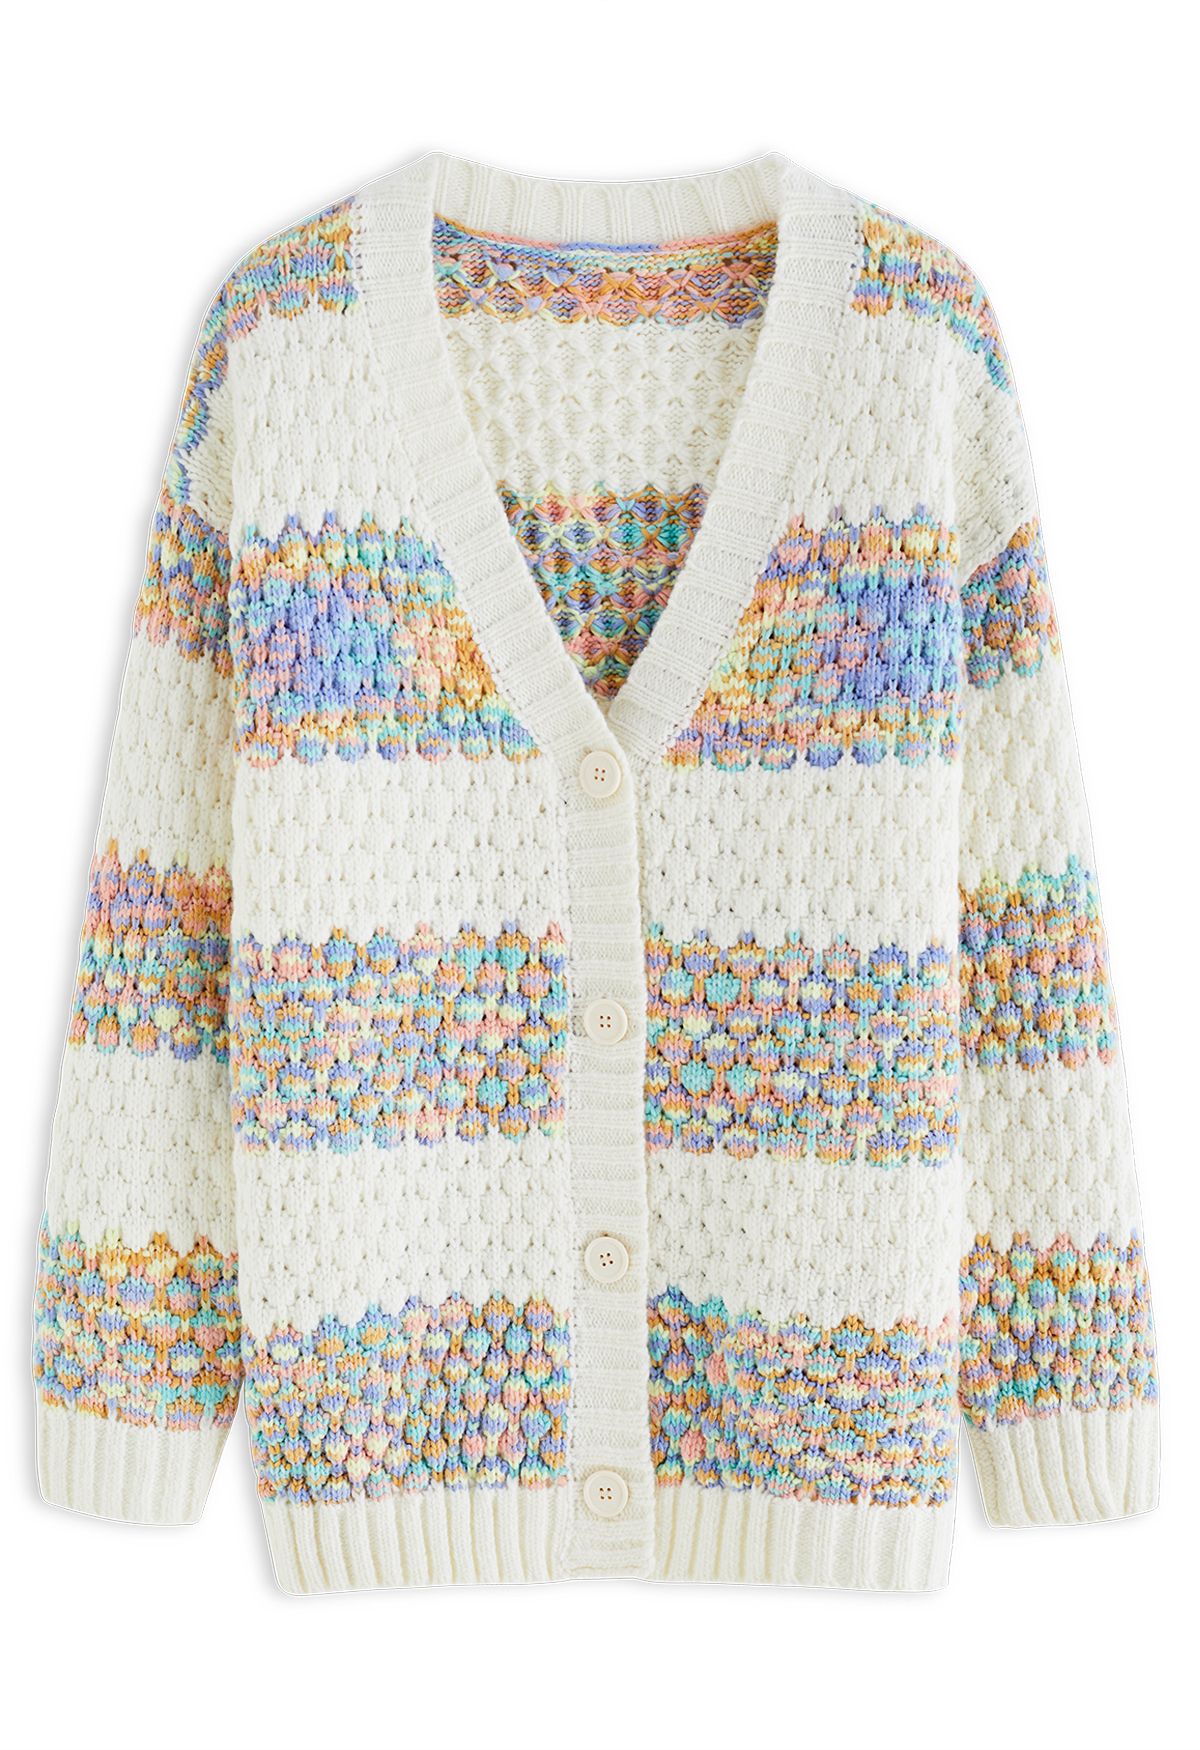 Colorful Stripe Embossed Chunky Knit Cardigan - Retro, Indie and Unique ...